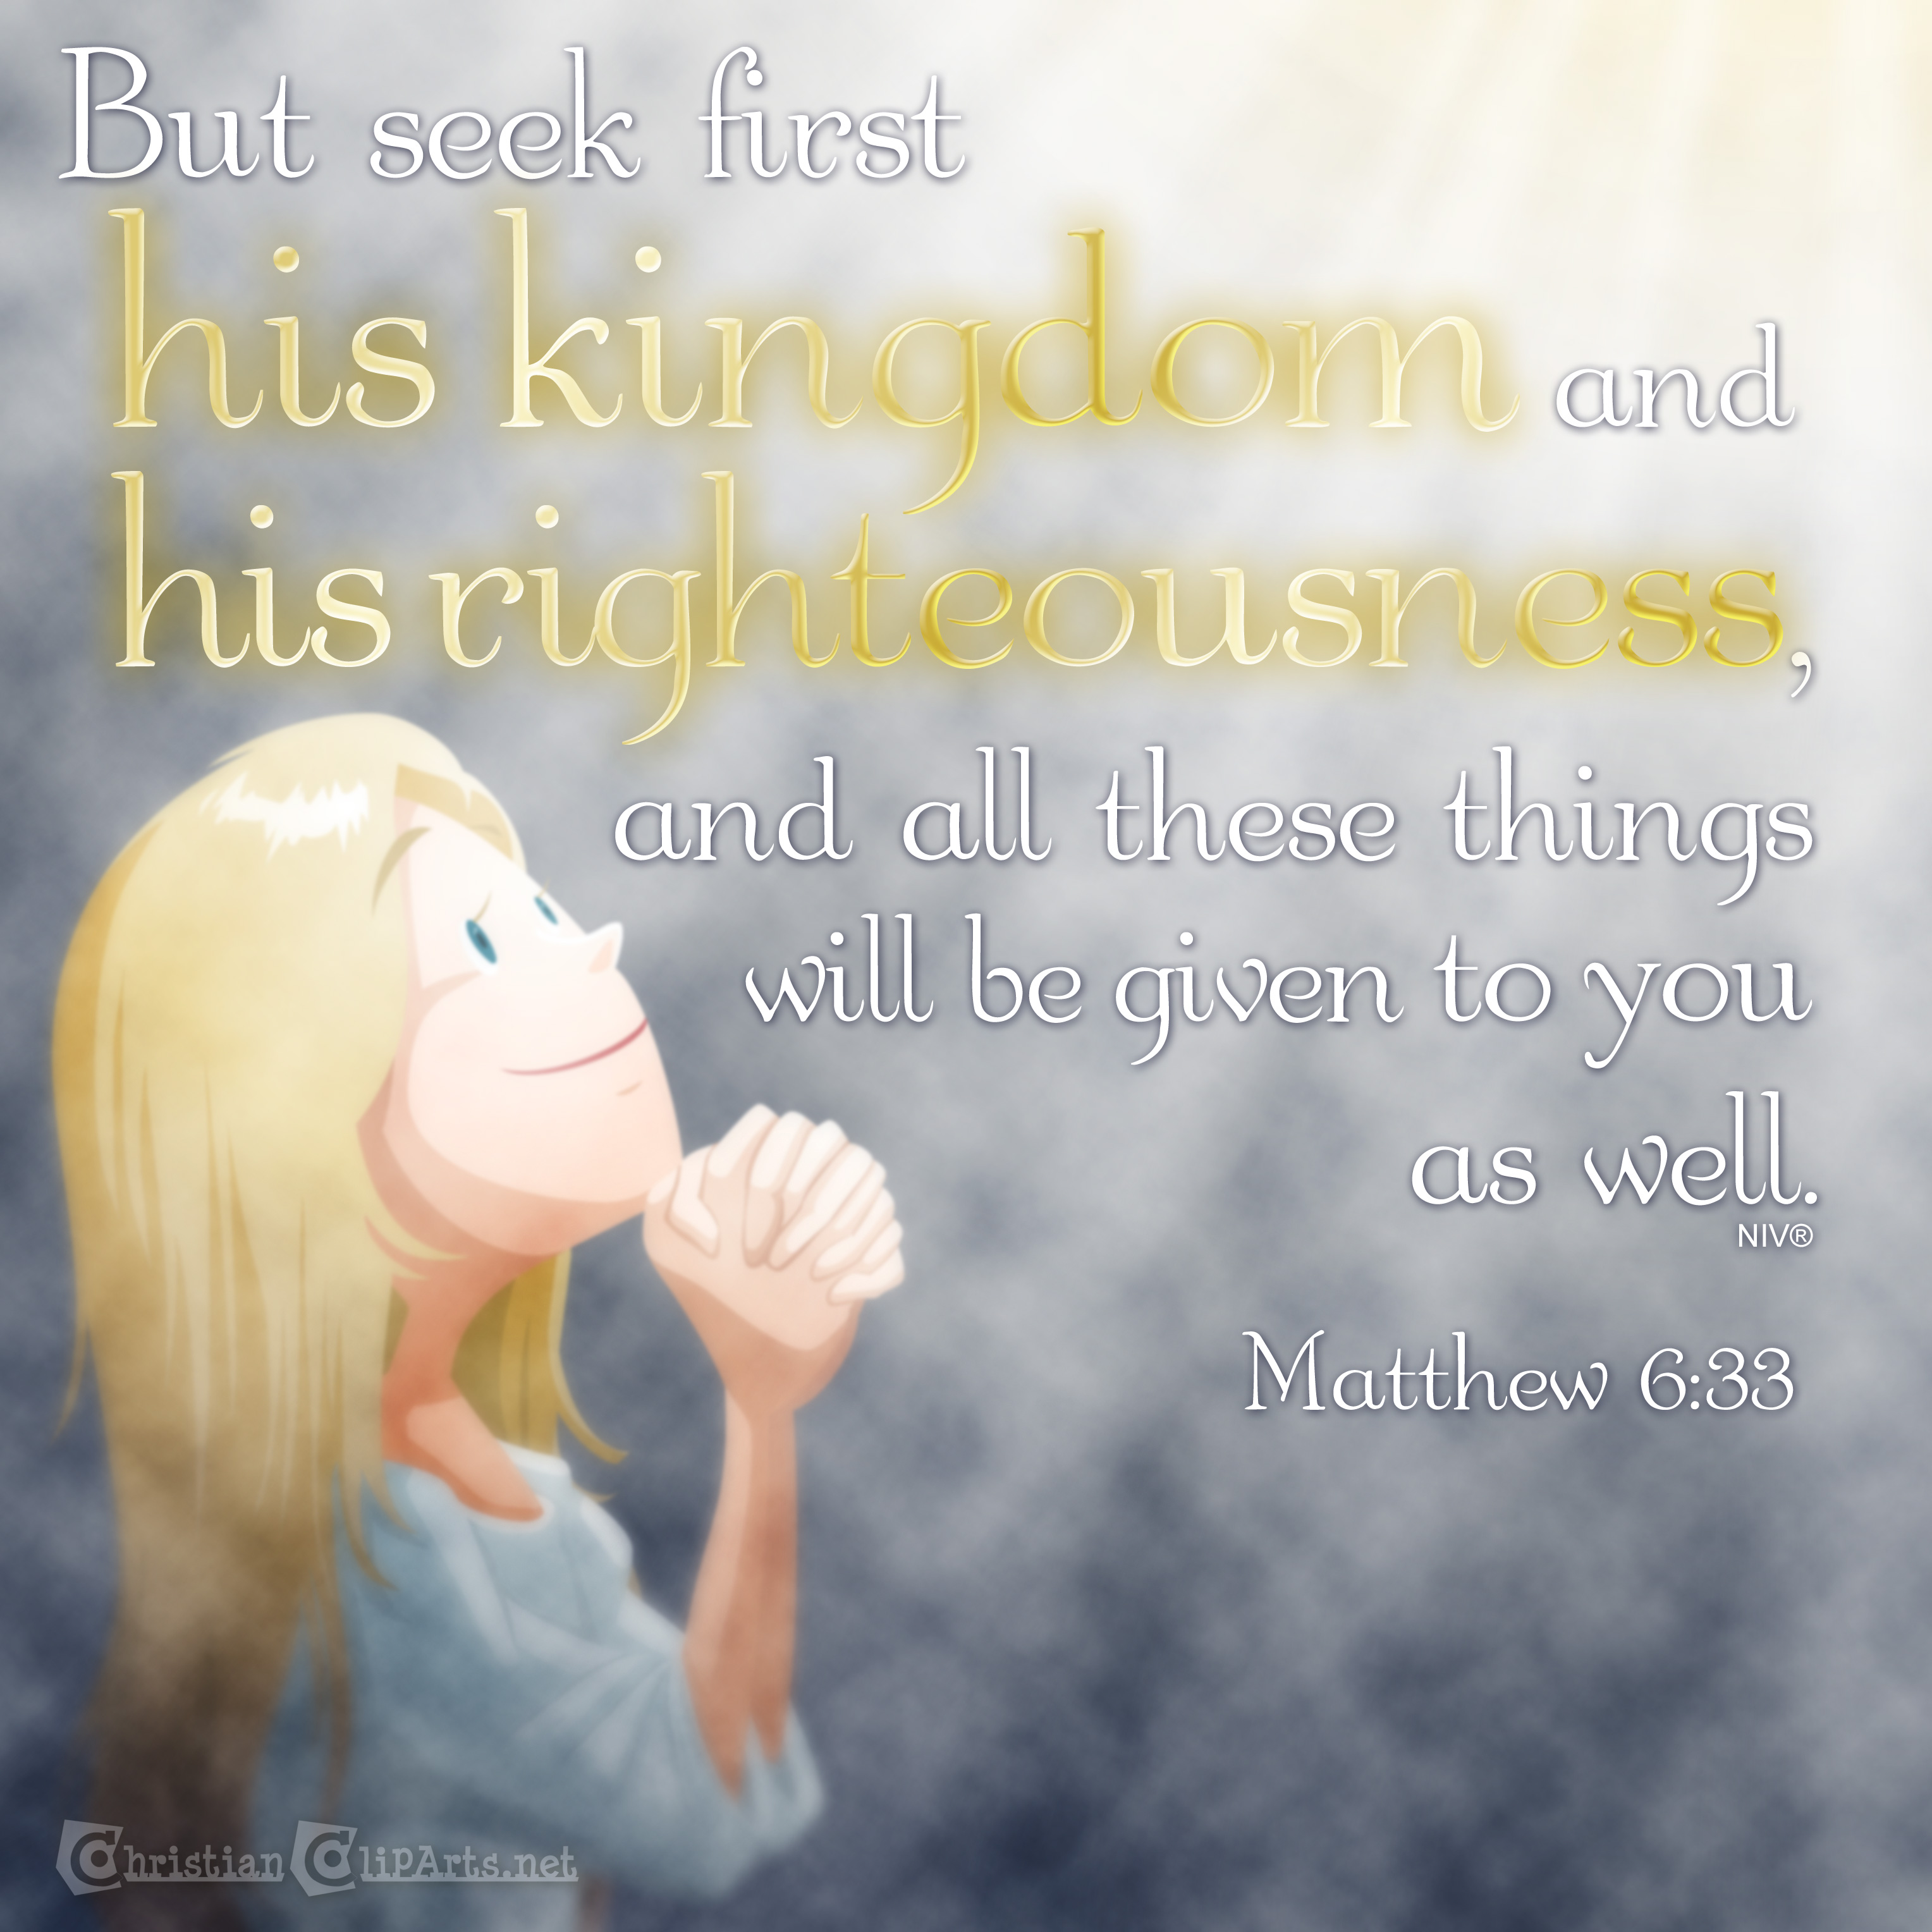 Seek first his kingdom and righteousness